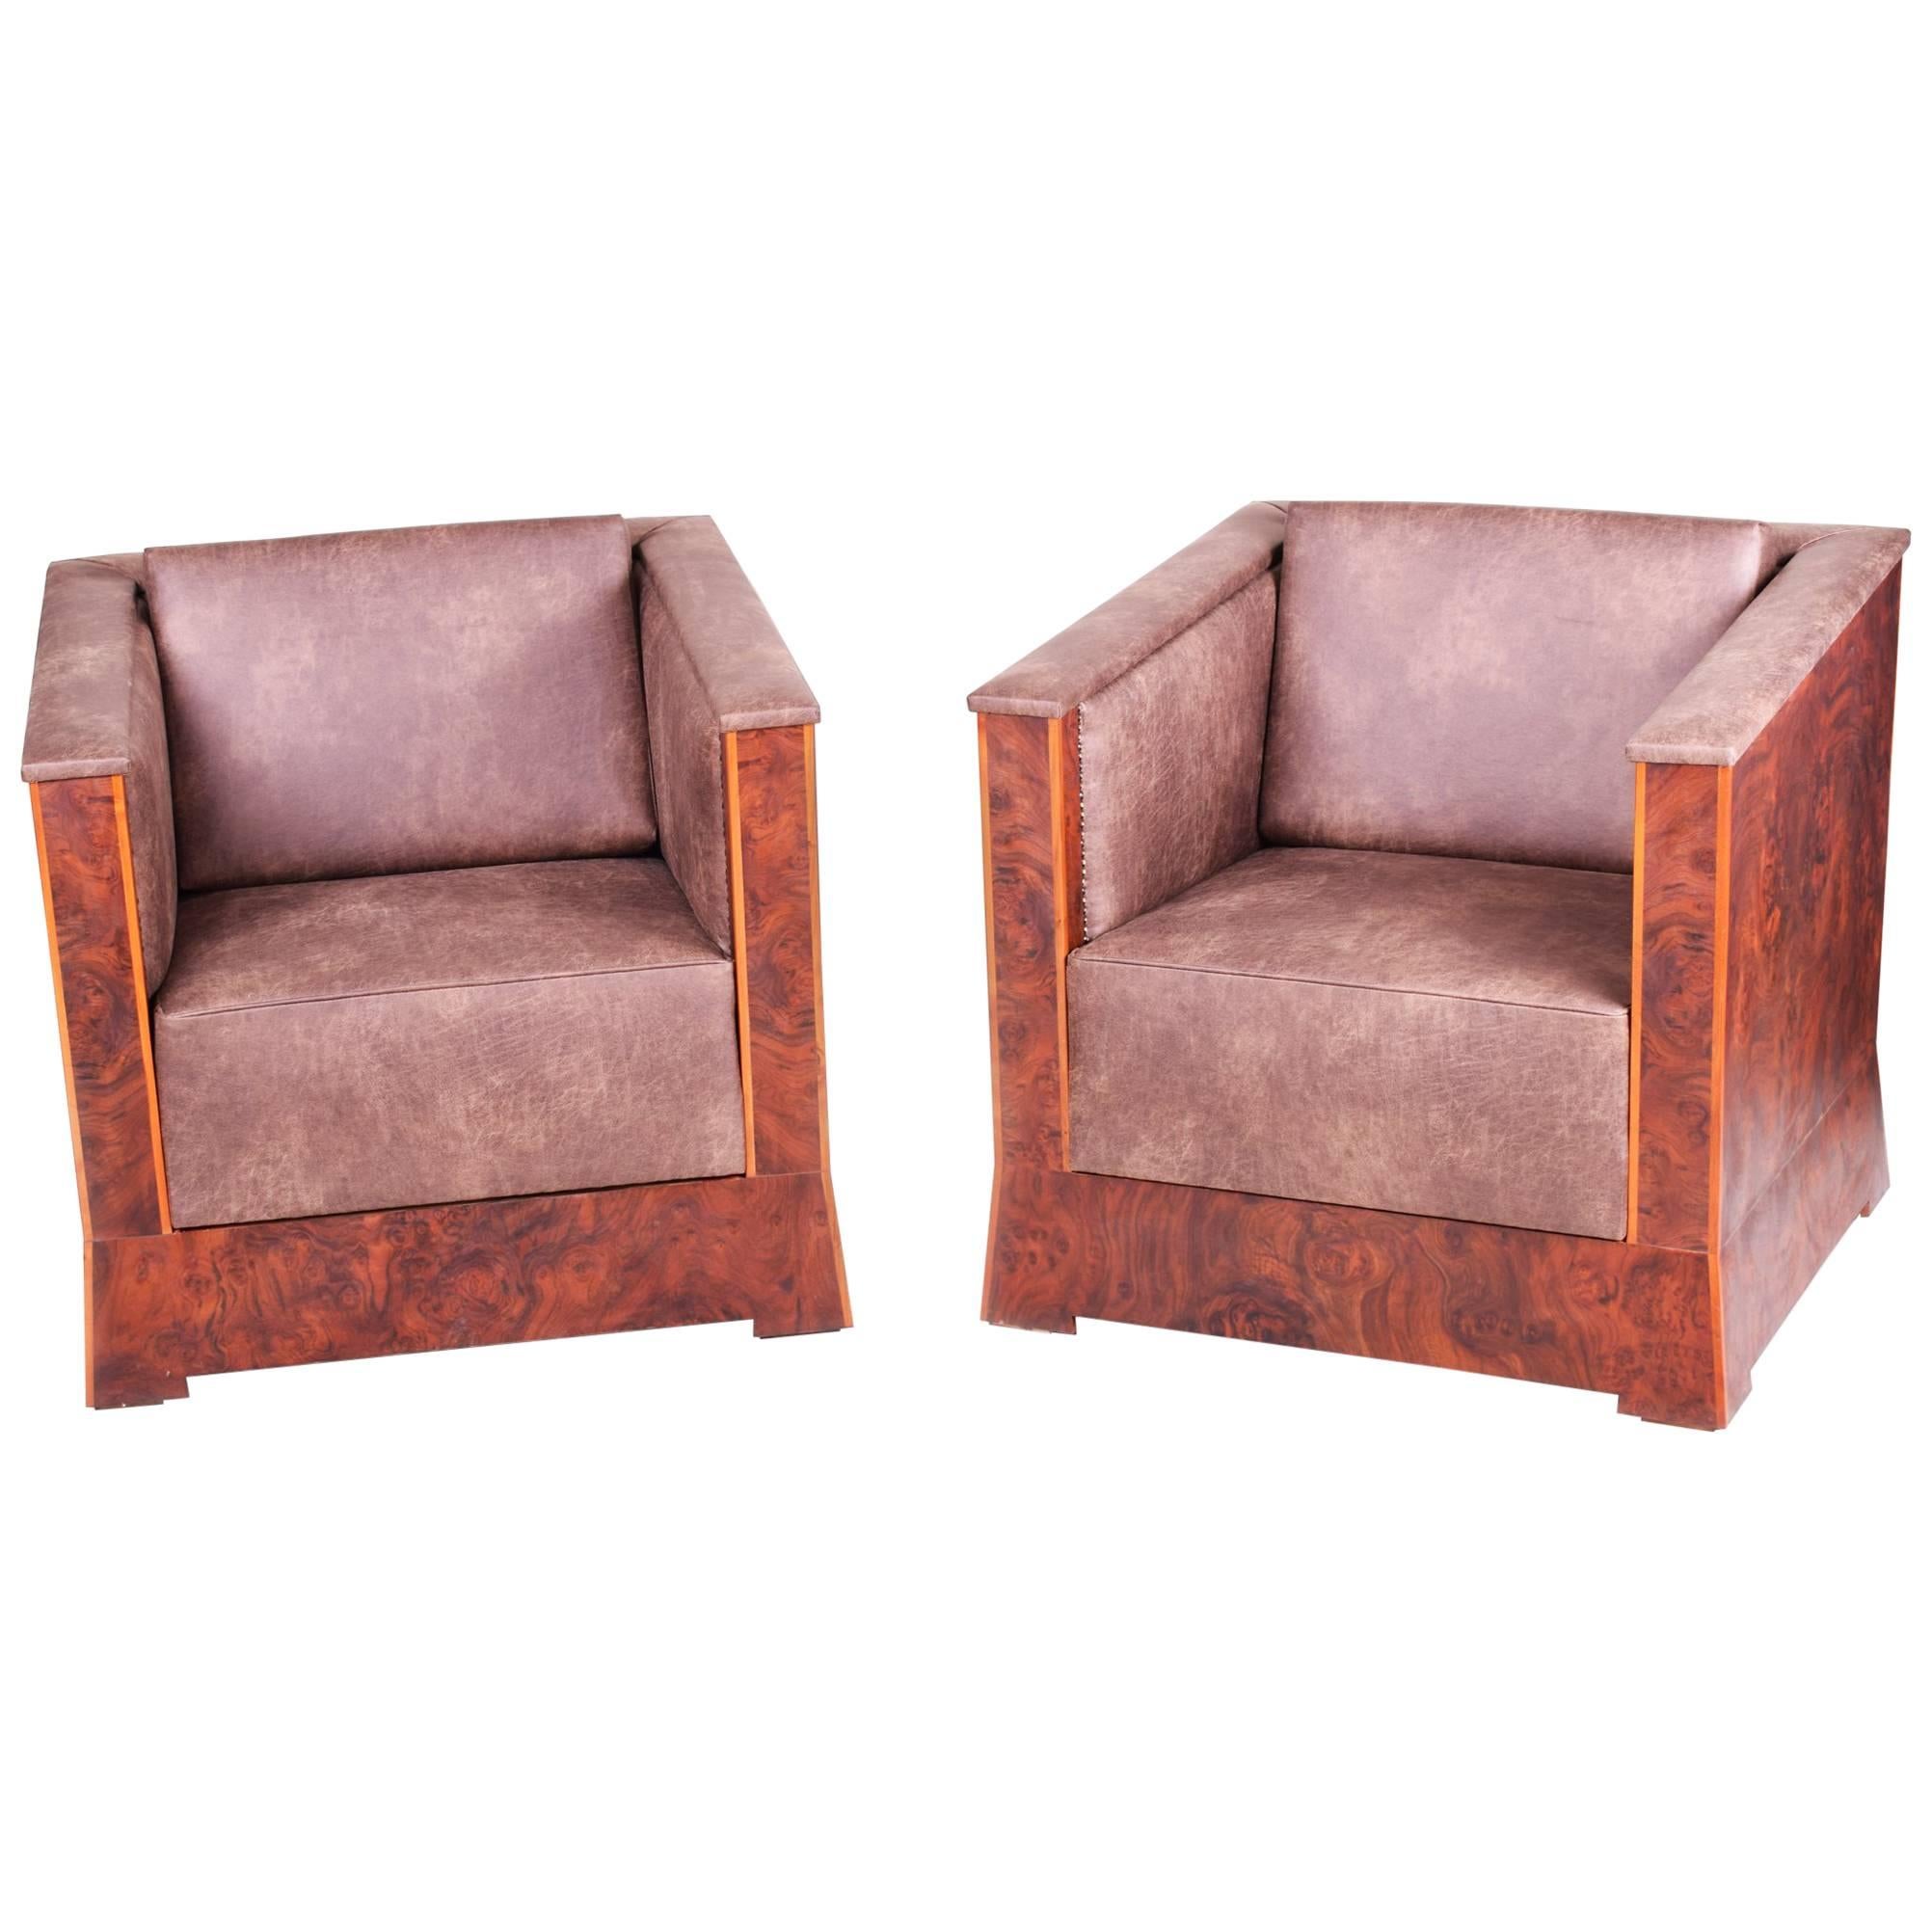 Unique Pair of Cubist Armchairs, Completely Restored